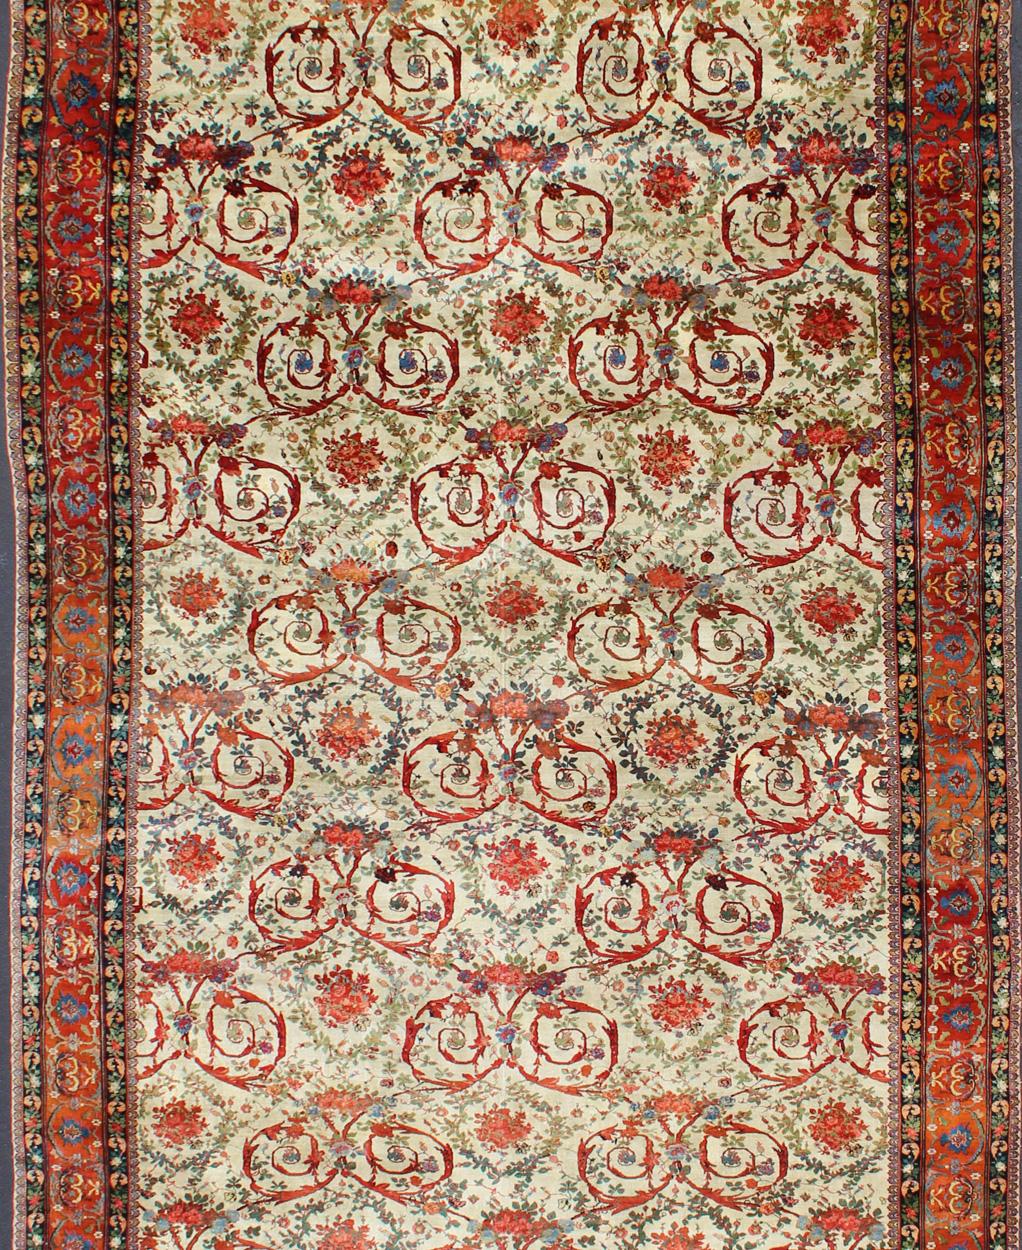 Very Large Antique Persian Bidjar Carpet in Ivory Background and Multi-Colors For Sale 4